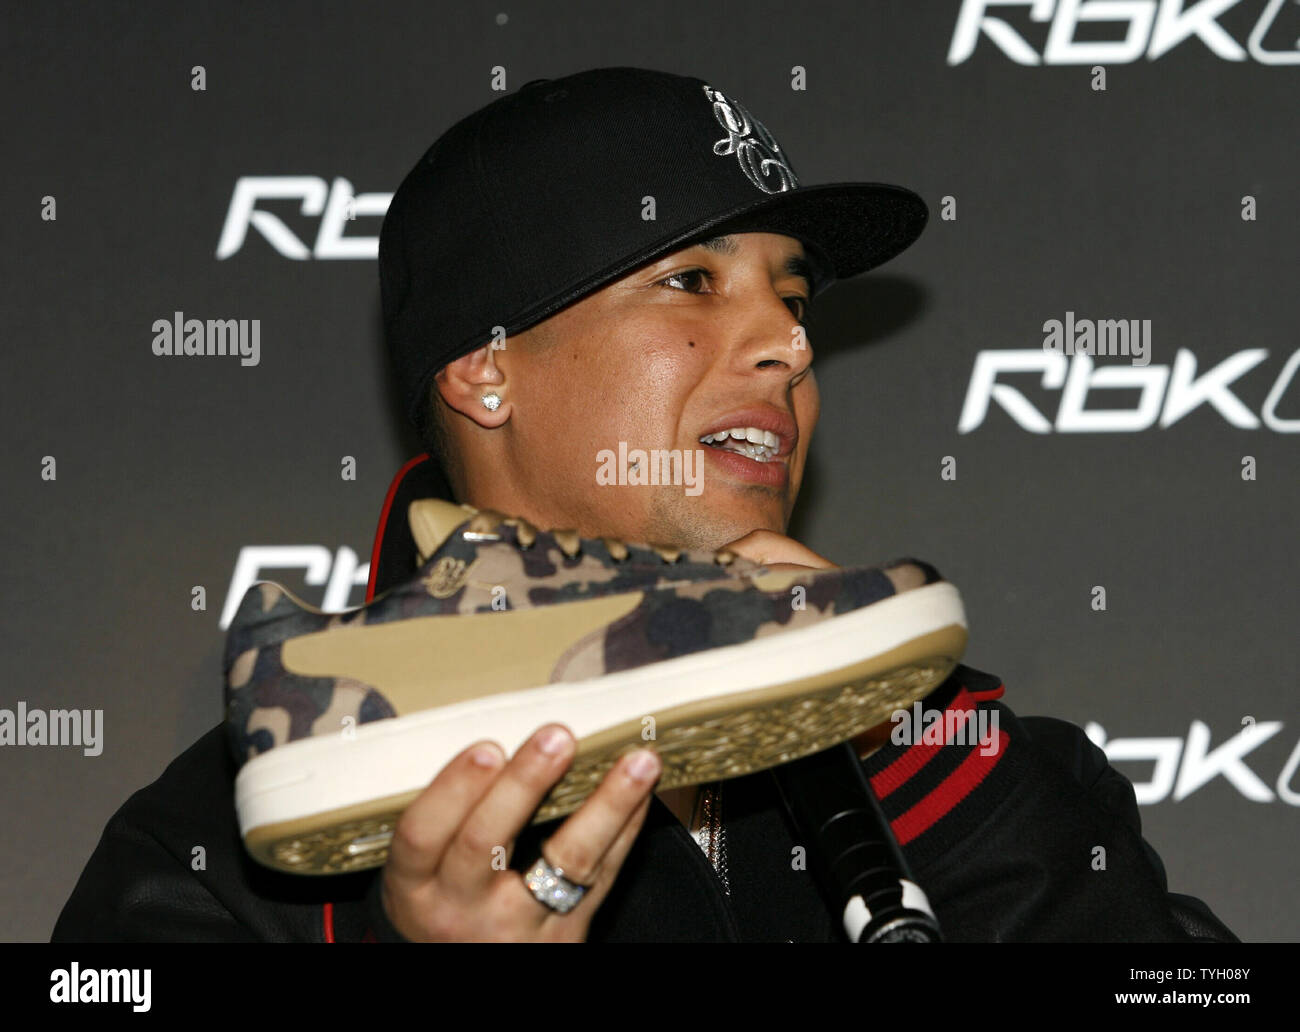 Daddy Yankee poses with his new sneaker at the Reebok RBK Now Playing press  conference at Marquee in New York City on March 8, 2006. (UPI Photo/John  Angelillo Stock Photo - Alamy